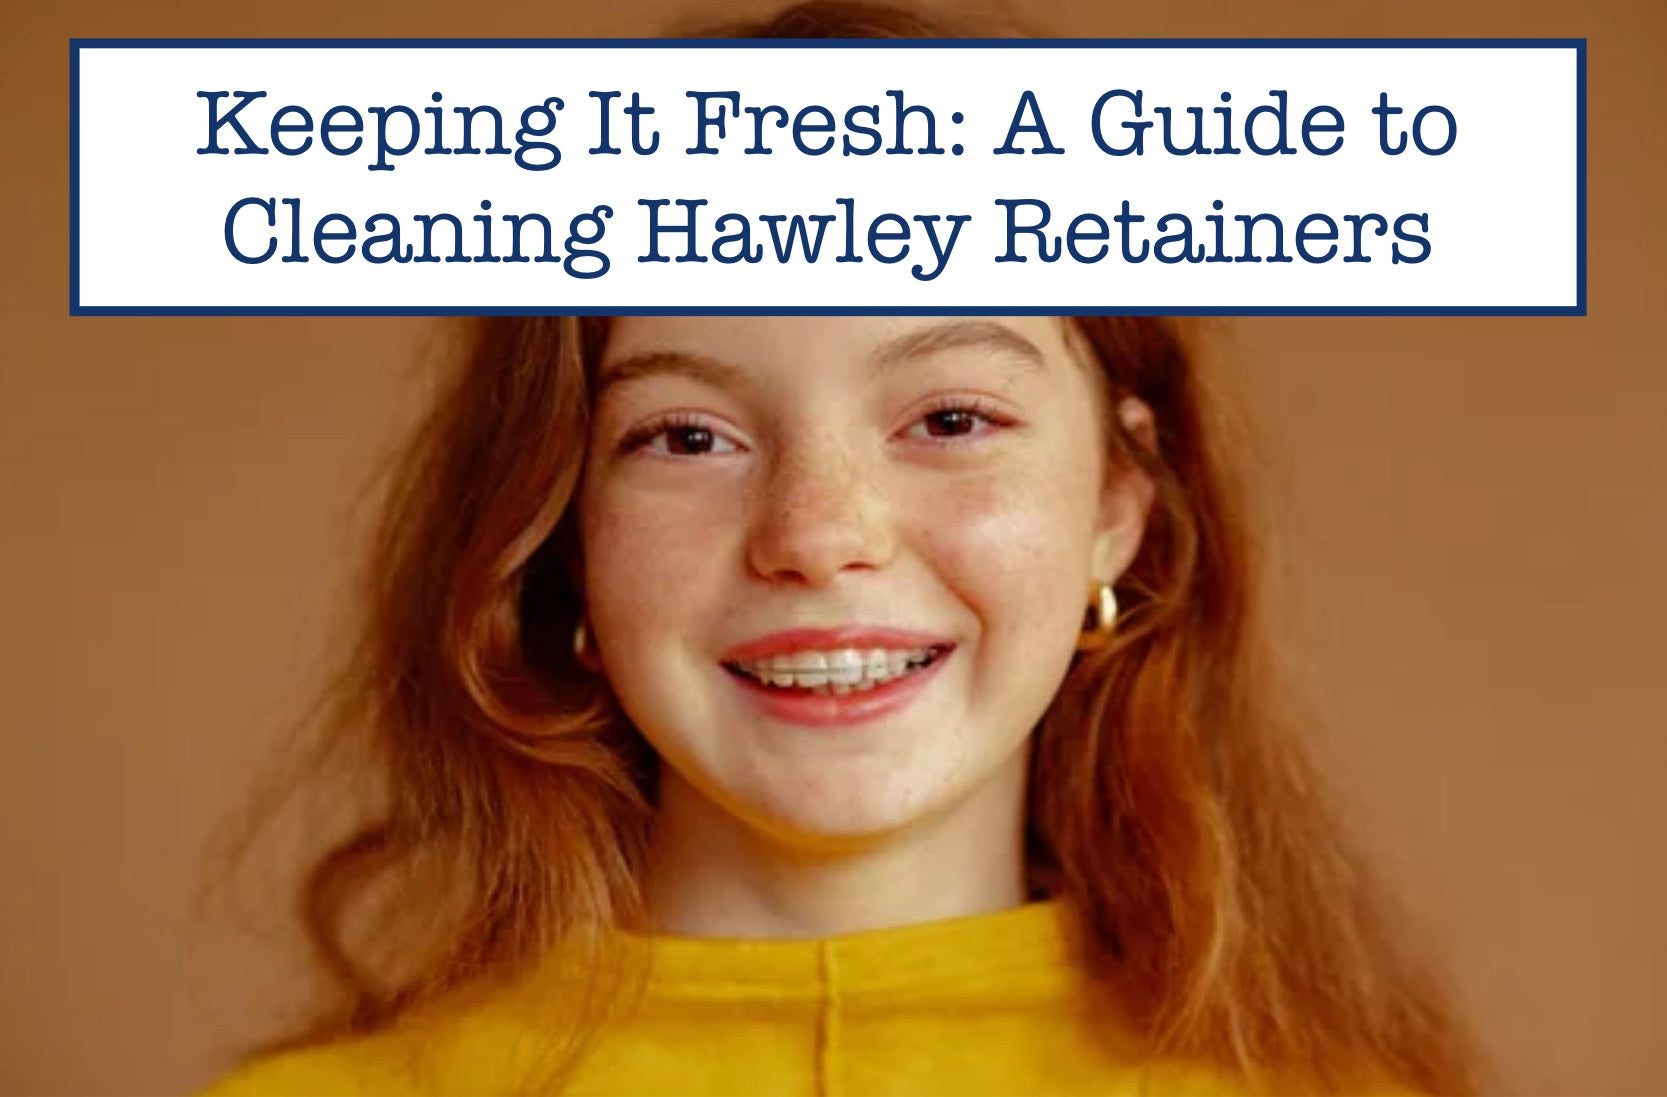 Keeping It Fresh 24/7: A Guide to Cleaning Hawley Retainers